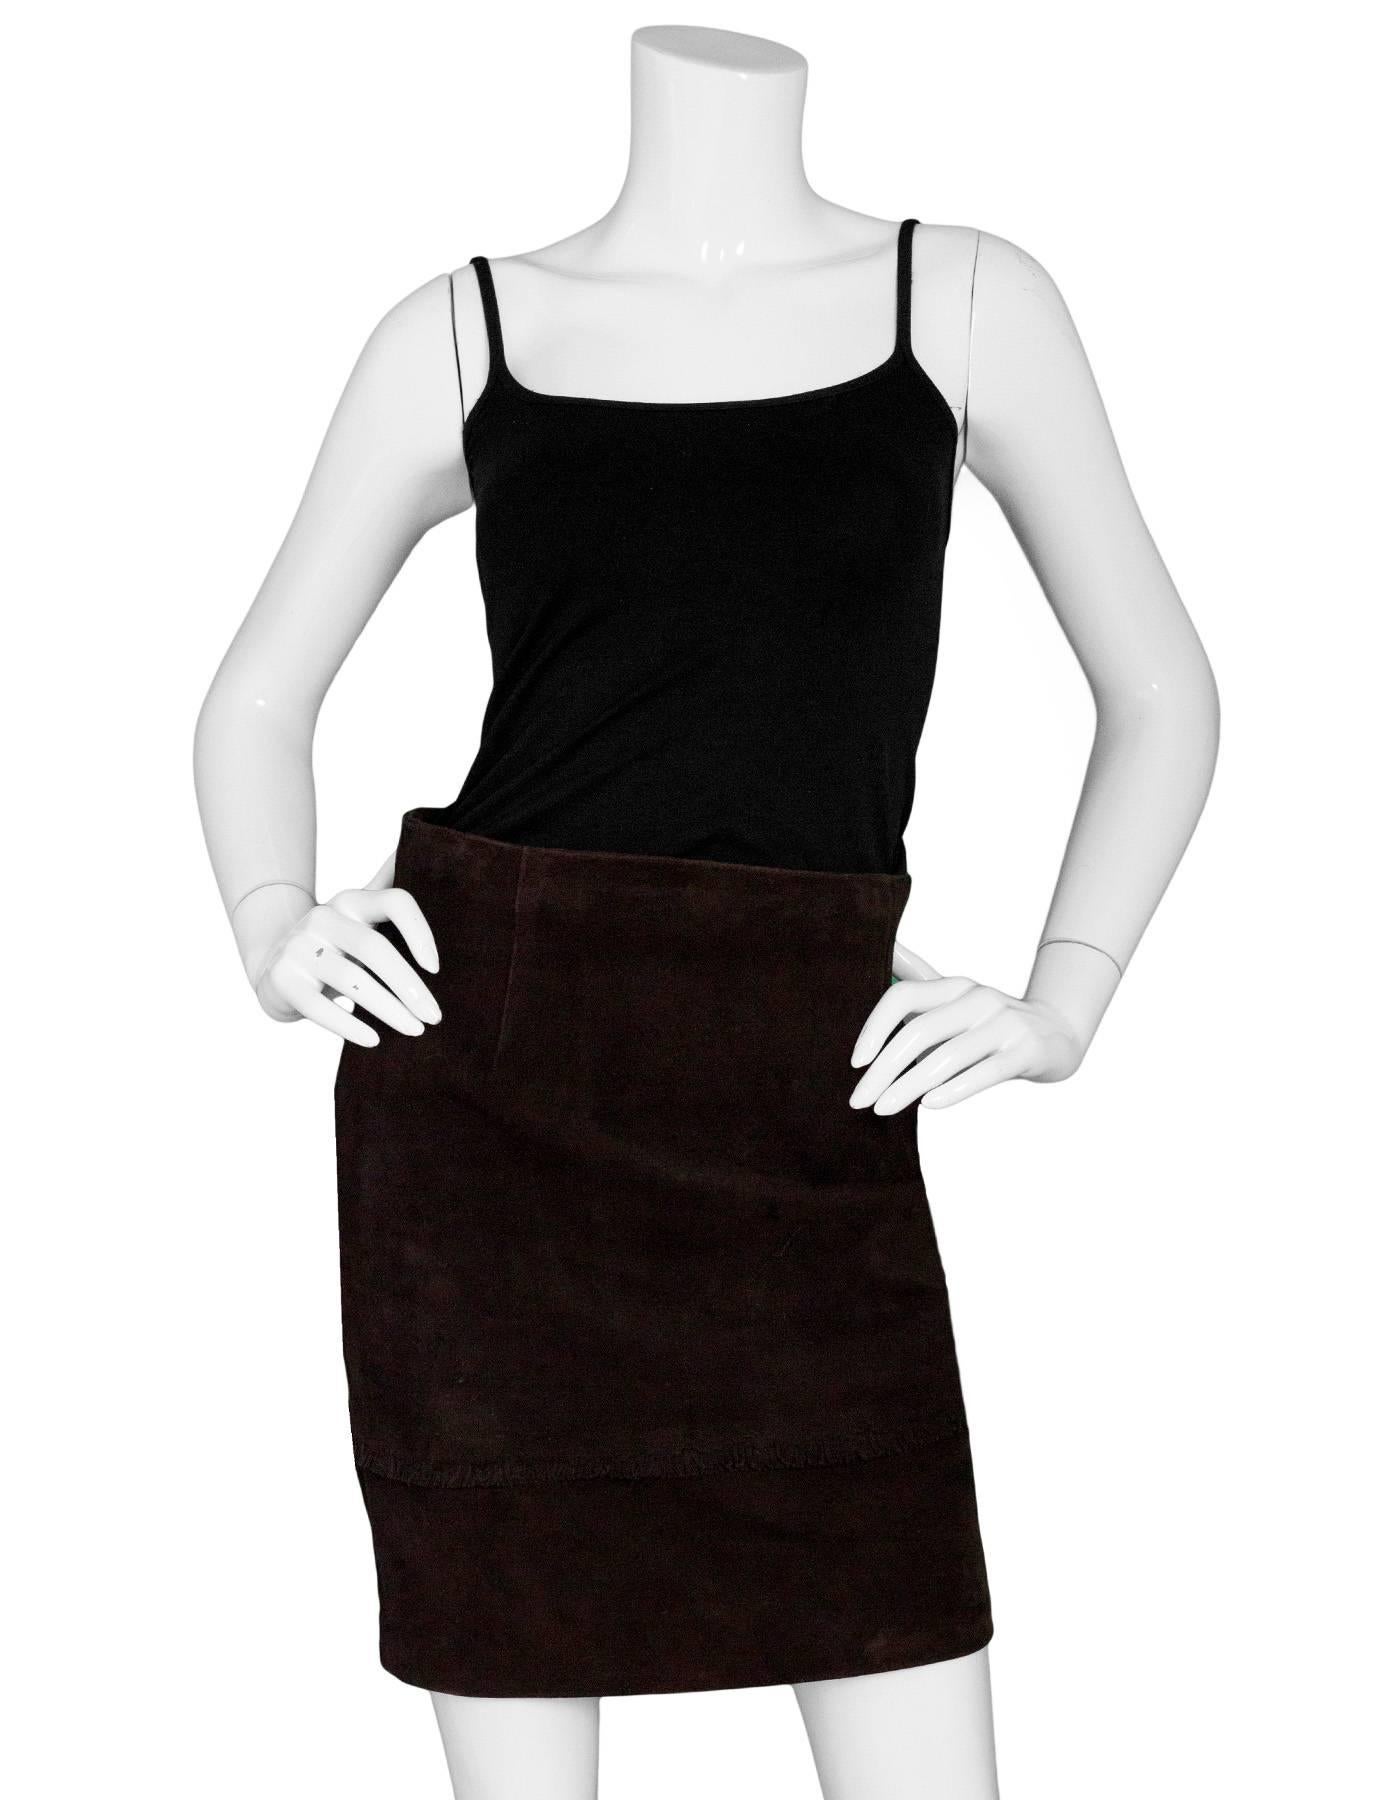 Eddi Brown Suede Skirt Sz IT42

Features fringe trim

Made In: Italy
Color: Brown
Composition: Leather
Lining: Brown textile lining
Closure/Opening: Back zip closure
Overall Condition: Excellent pre-owned condition with the exception of some gentle